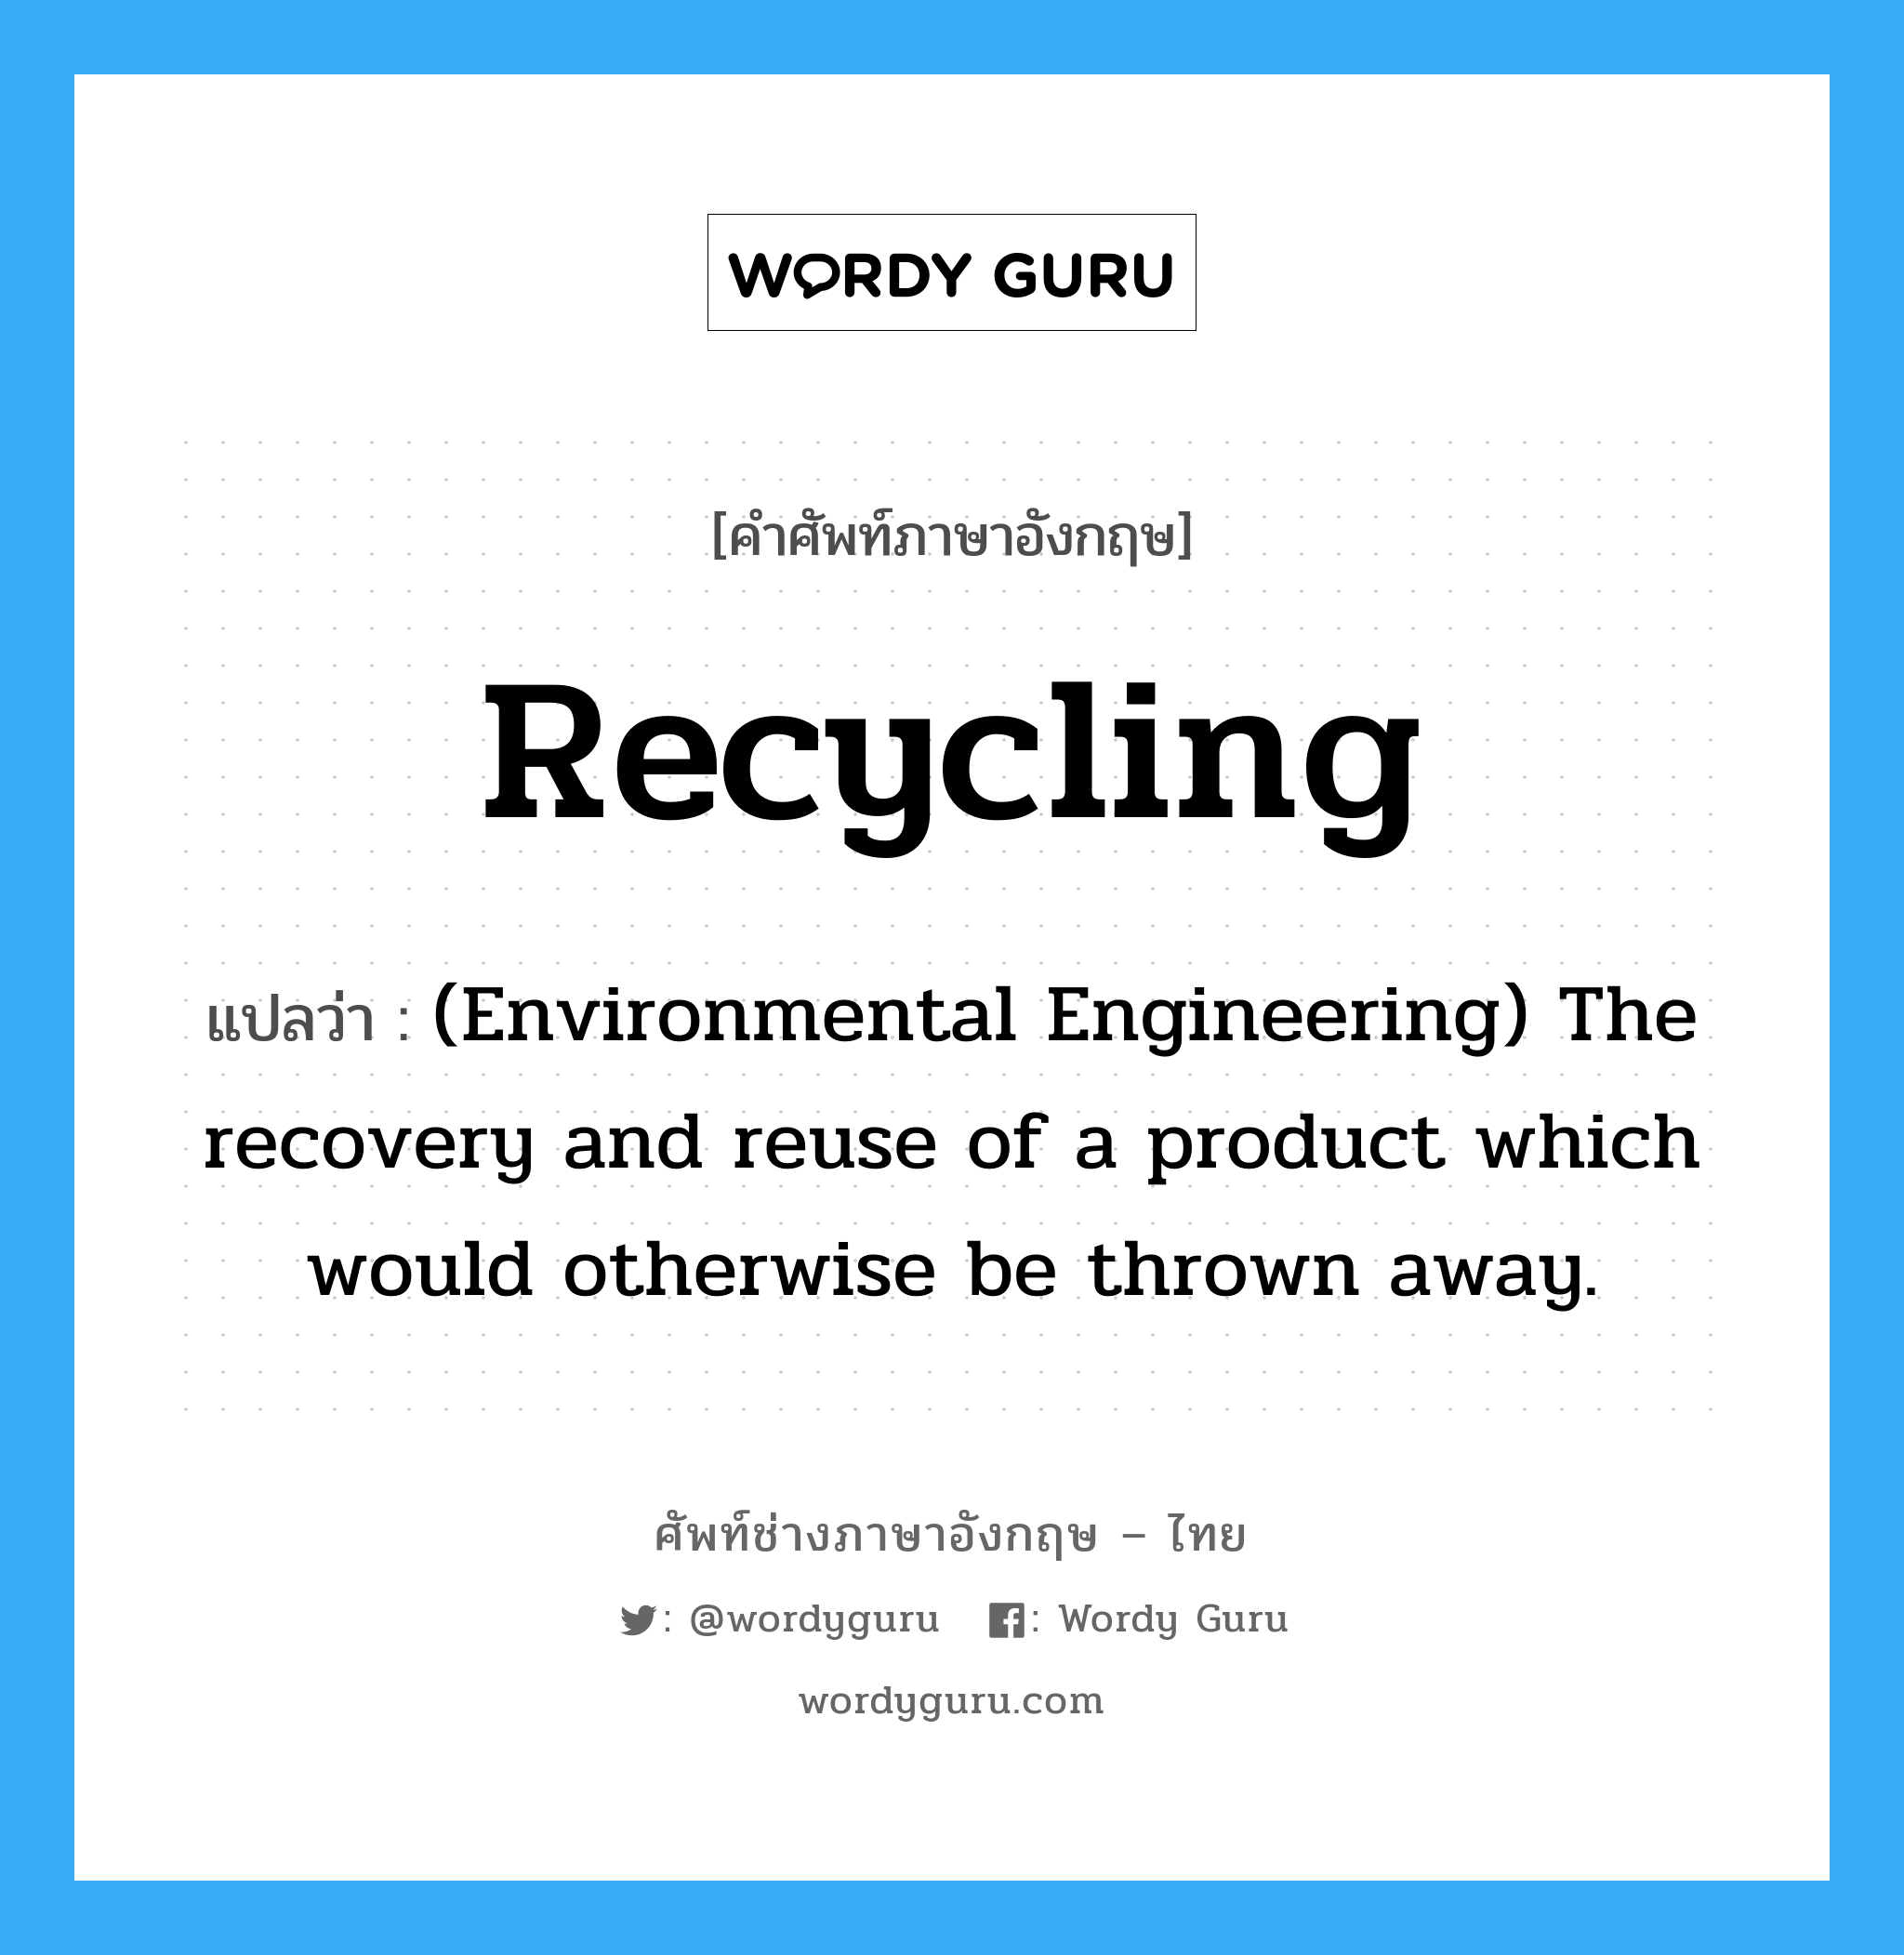 Recycling แปลว่า?, คำศัพท์ช่างภาษาอังกฤษ - ไทย Recycling คำศัพท์ภาษาอังกฤษ Recycling แปลว่า (Environmental Engineering) The recovery and reuse of a product which would otherwise be thrown away.